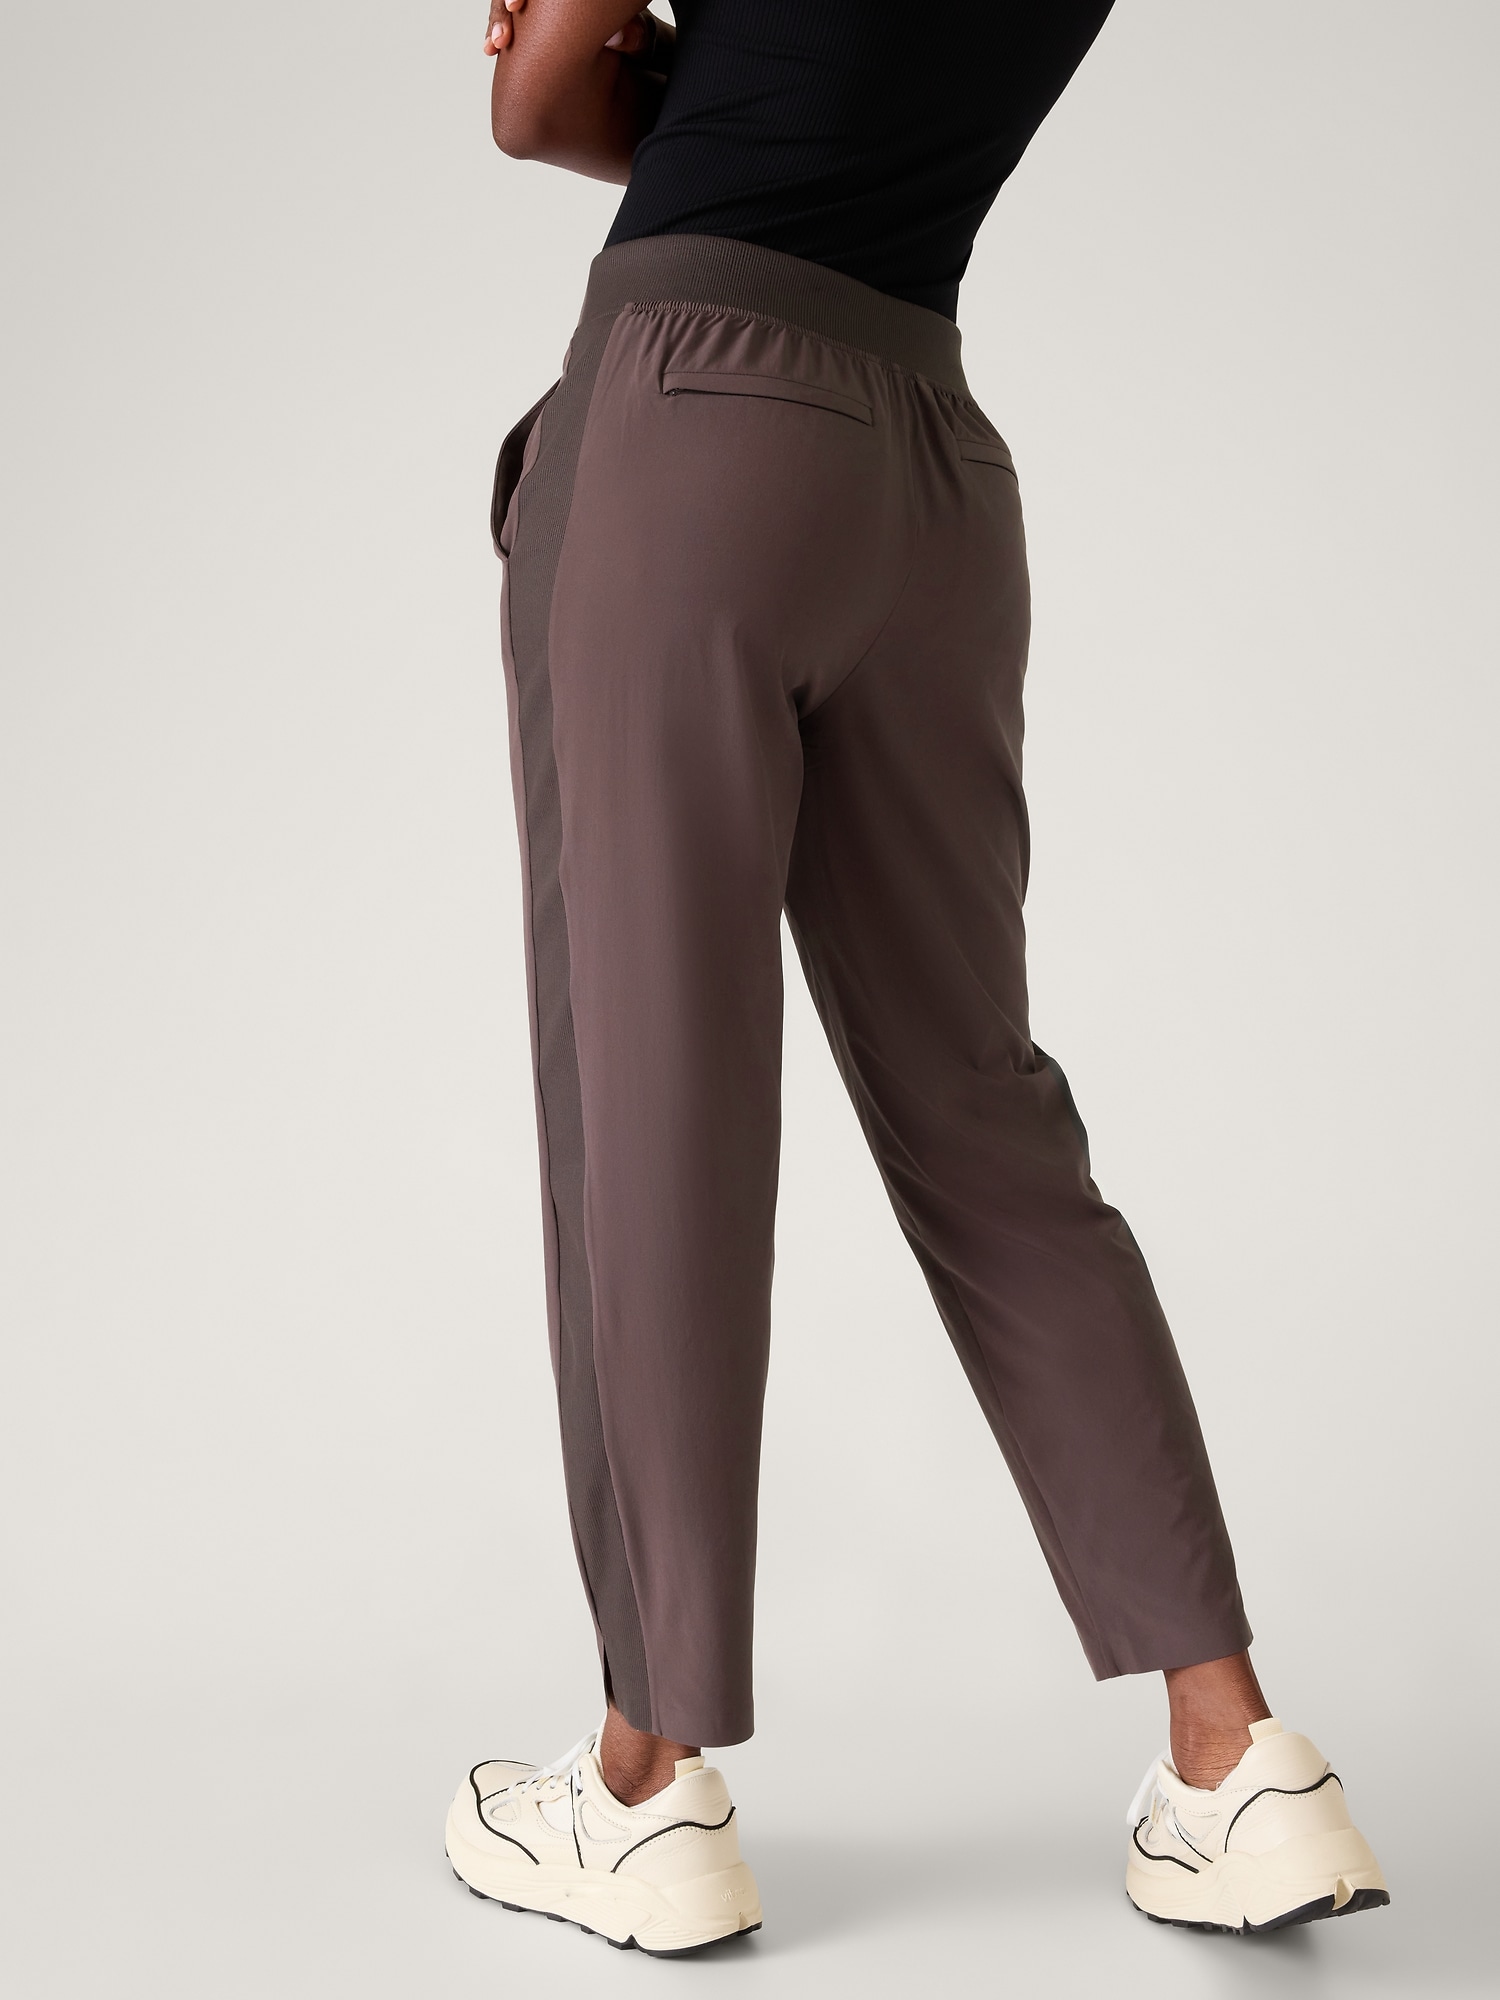 EUC Athleta Brooklyn Ankle Pant, Mineral Brown SIZE 0 #198671